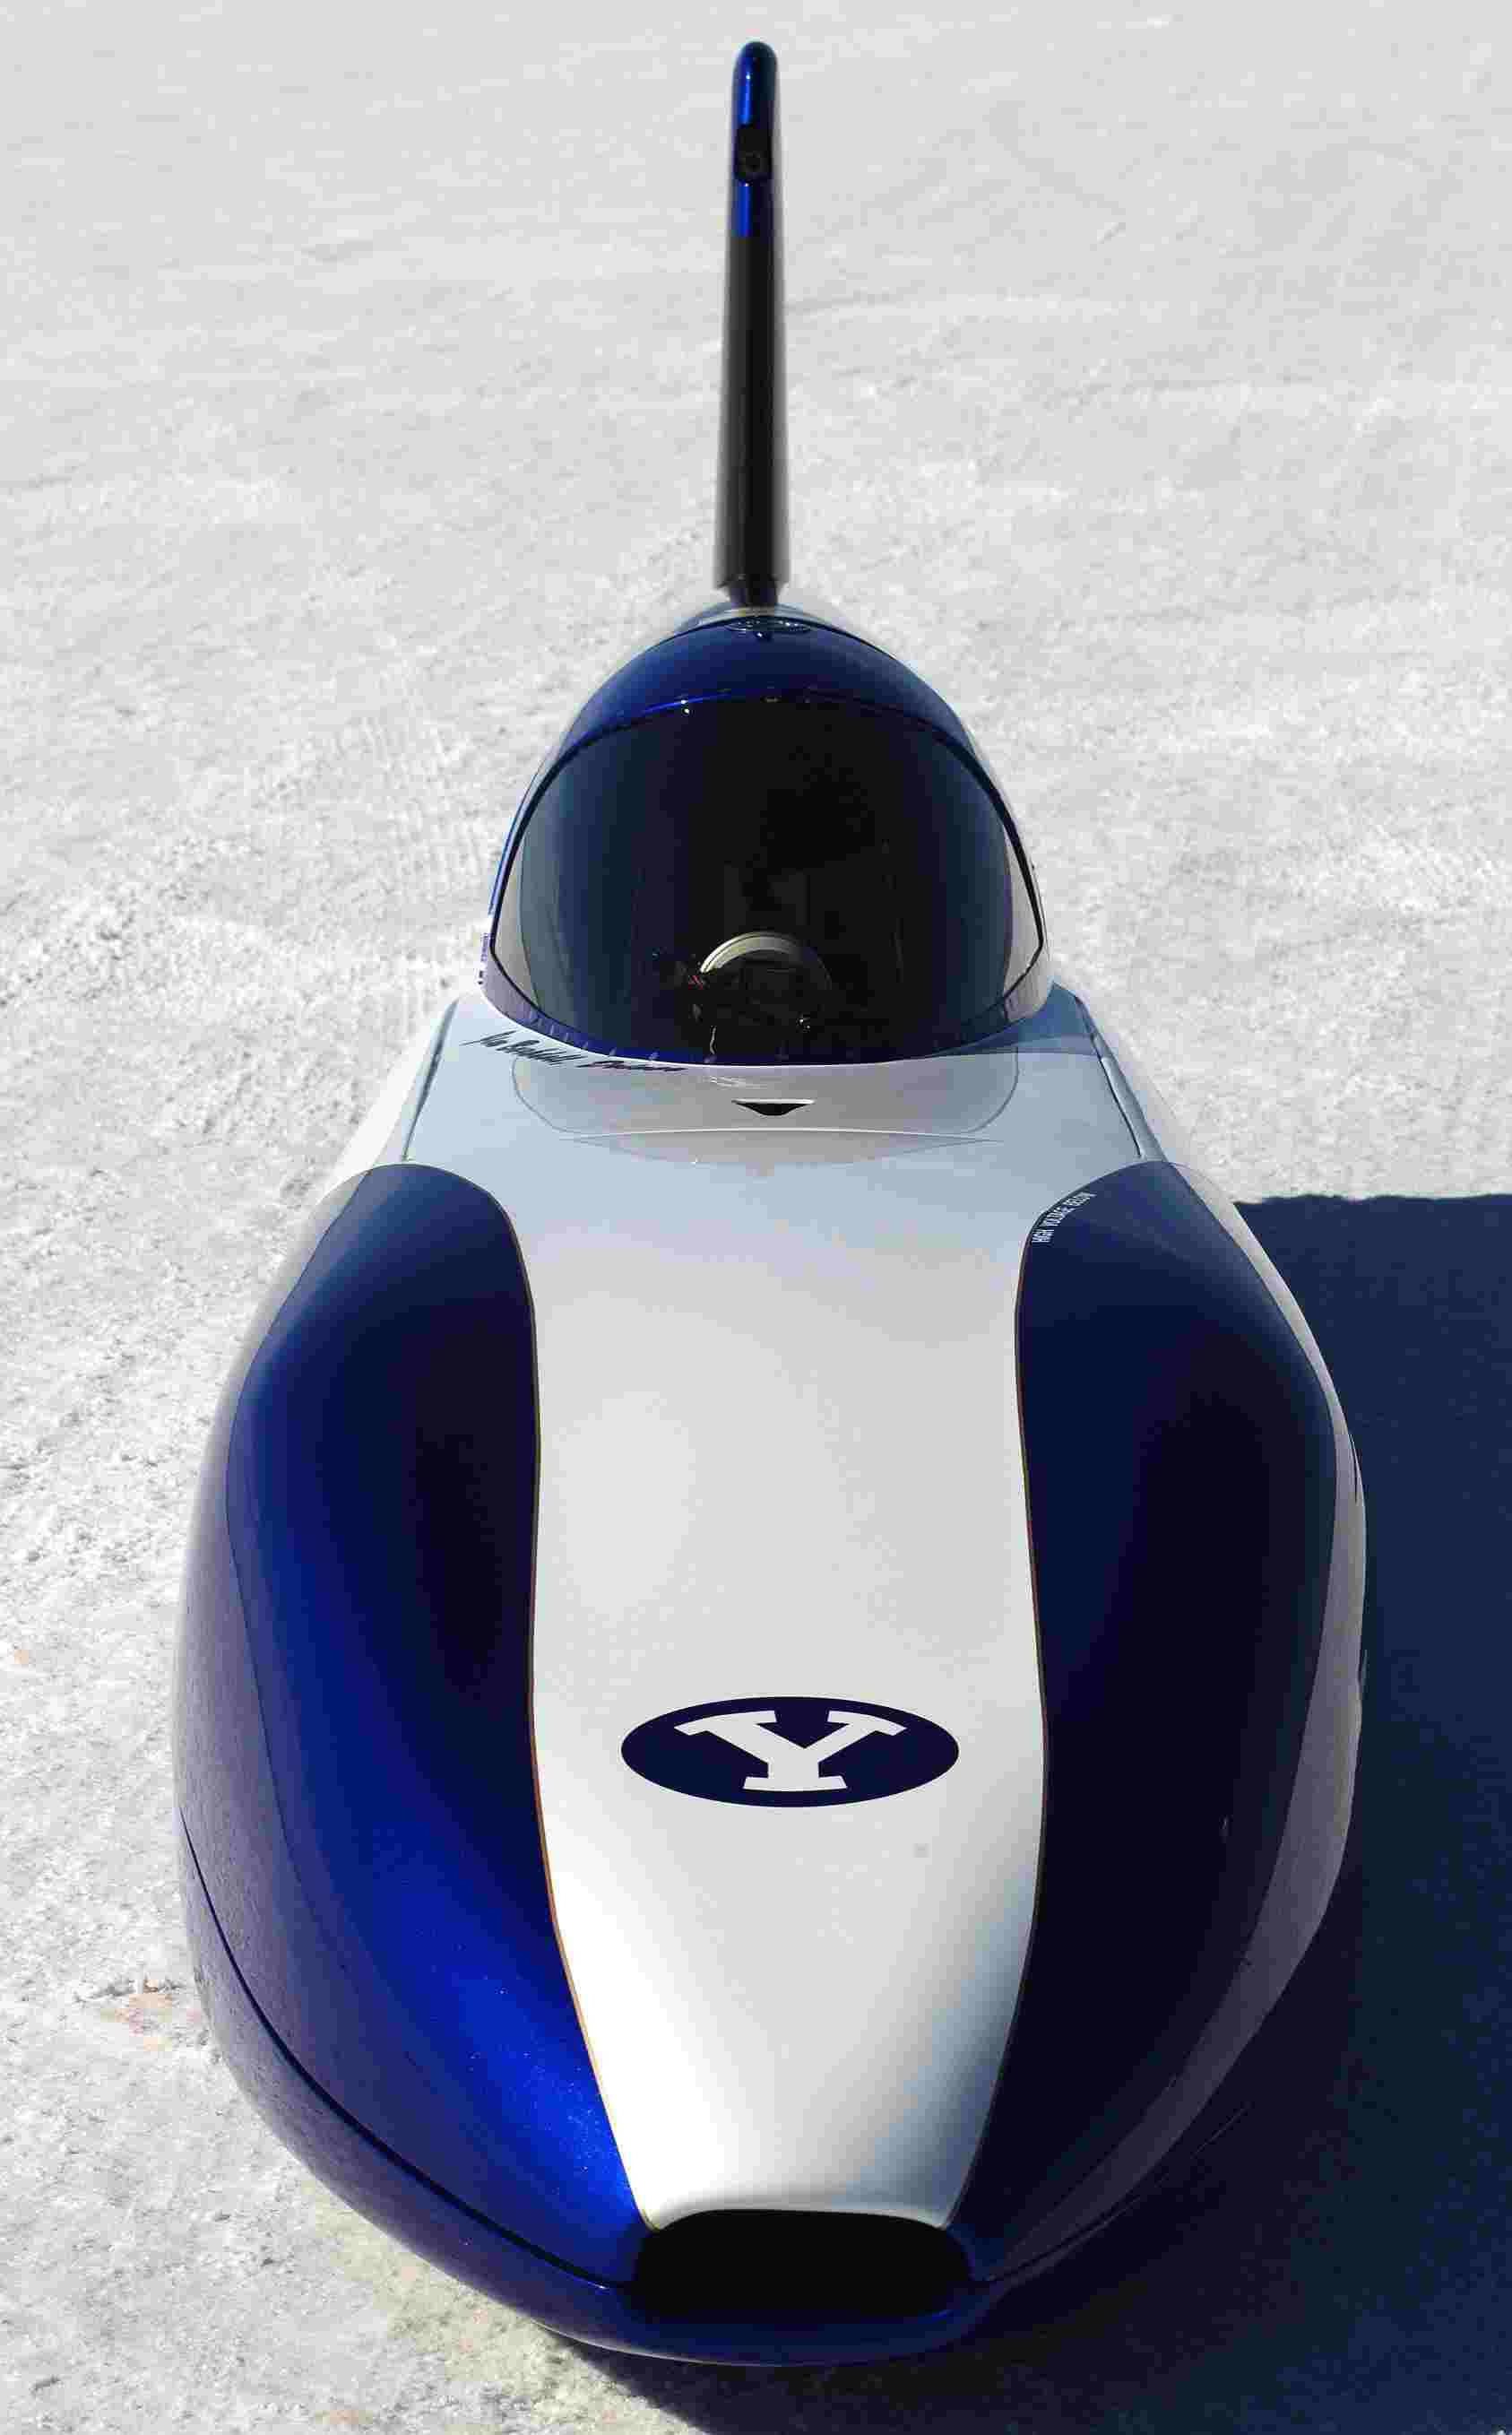 BYU electric streamliner record breaking car 155 mph 2011